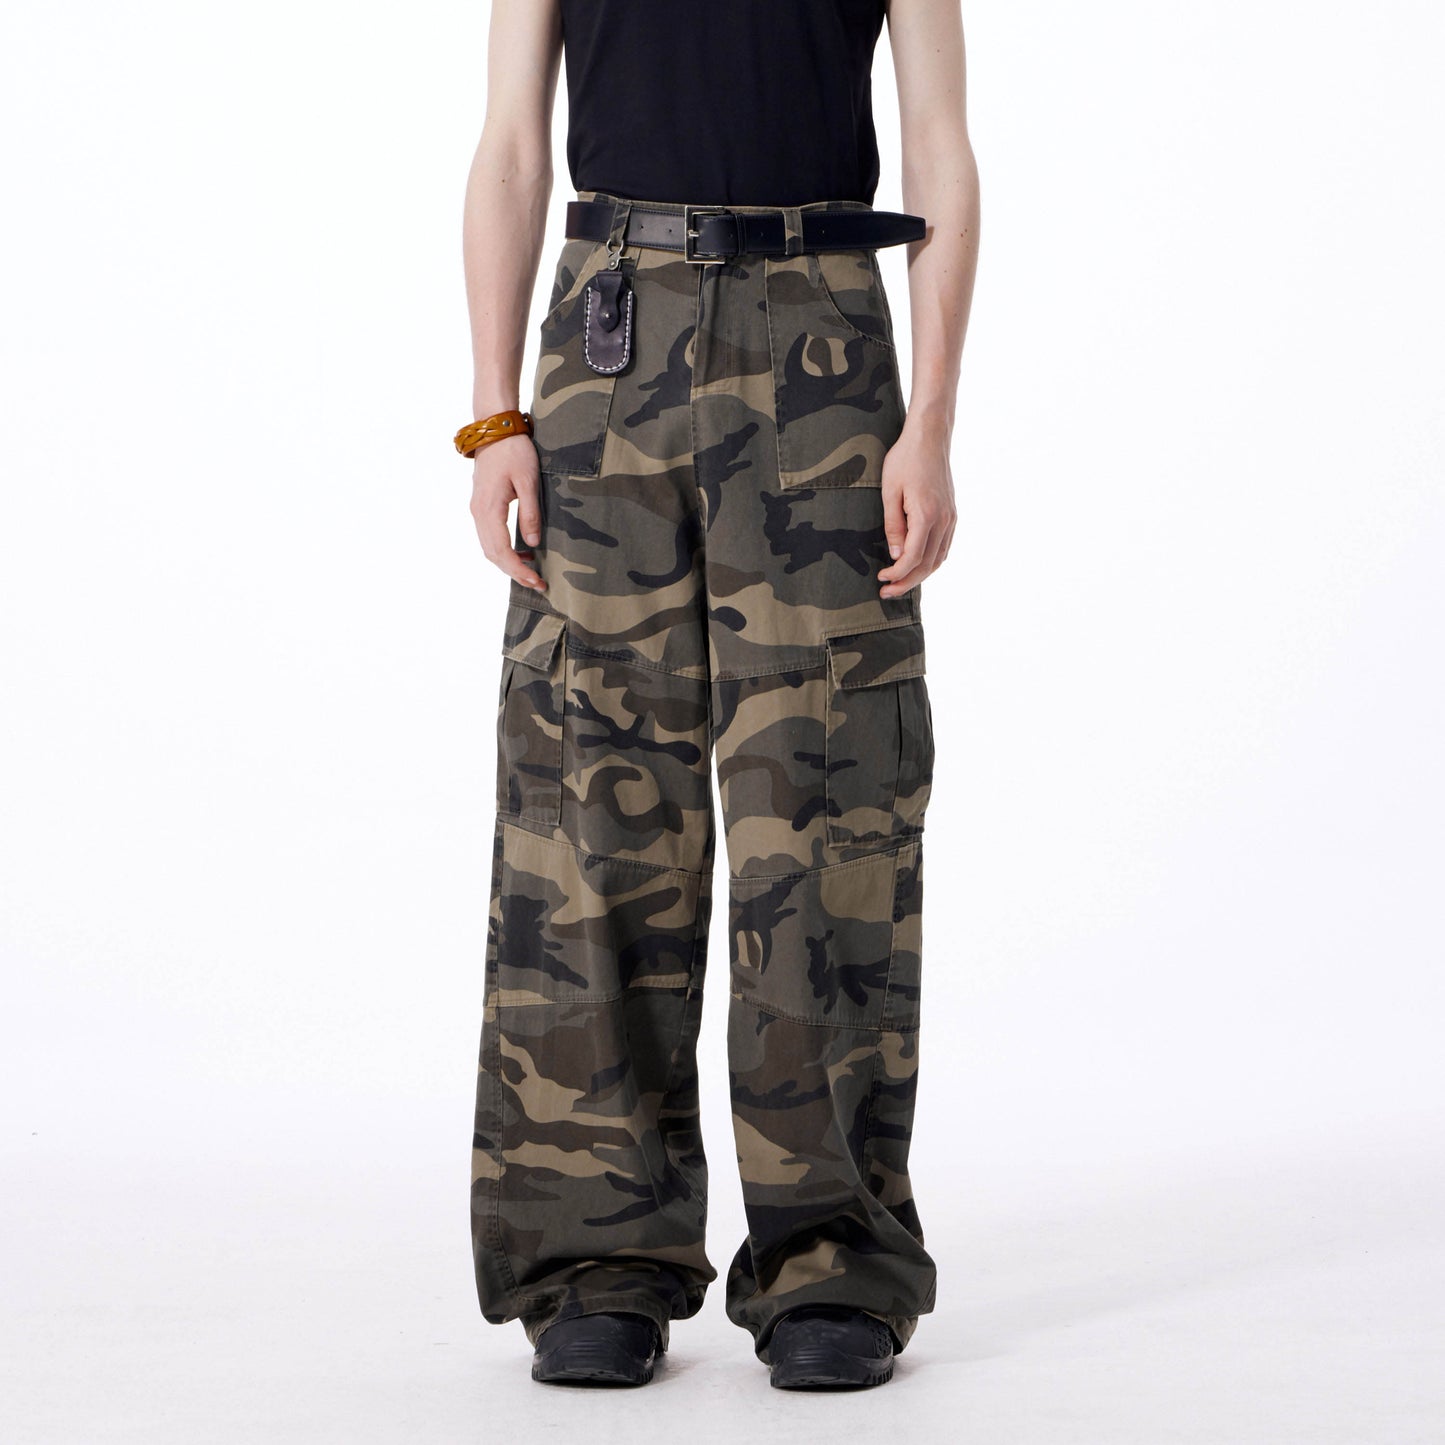 NUTH ‘Unisex’ Camouflage Overalls